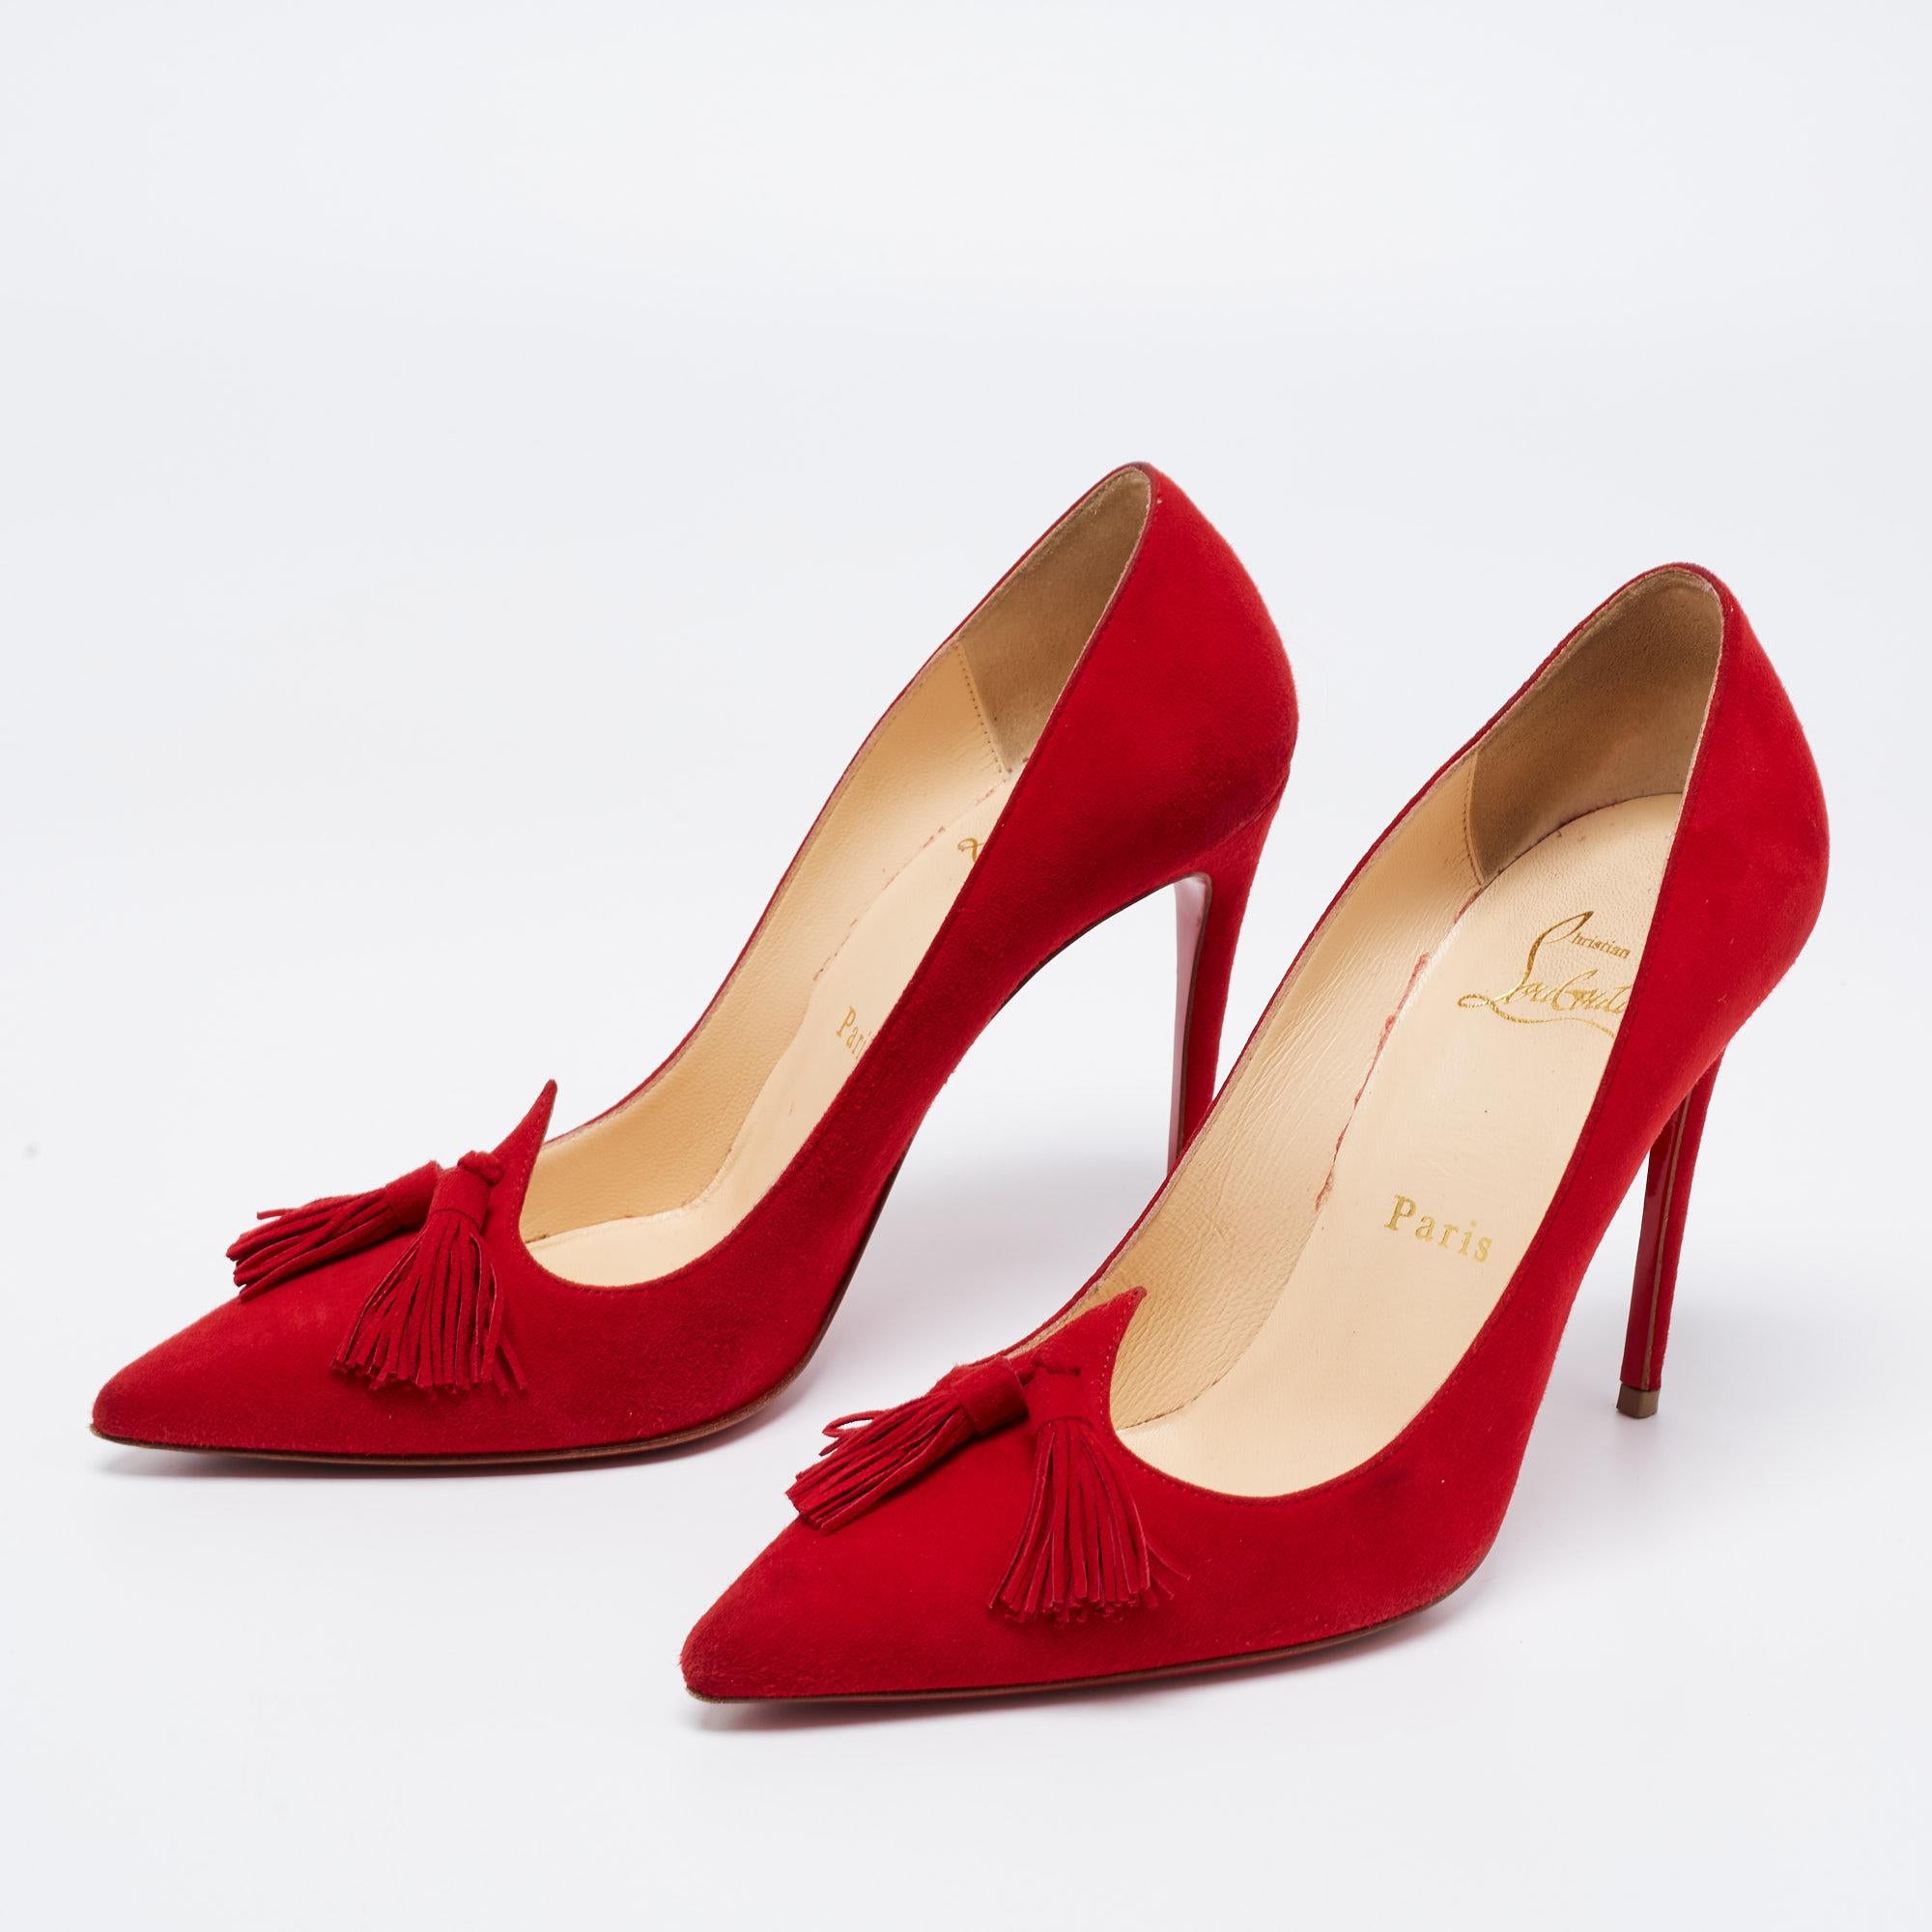 Christian Louboutin Red Suede Tassel Embellished Gwalior Pumps Size 36.5 3